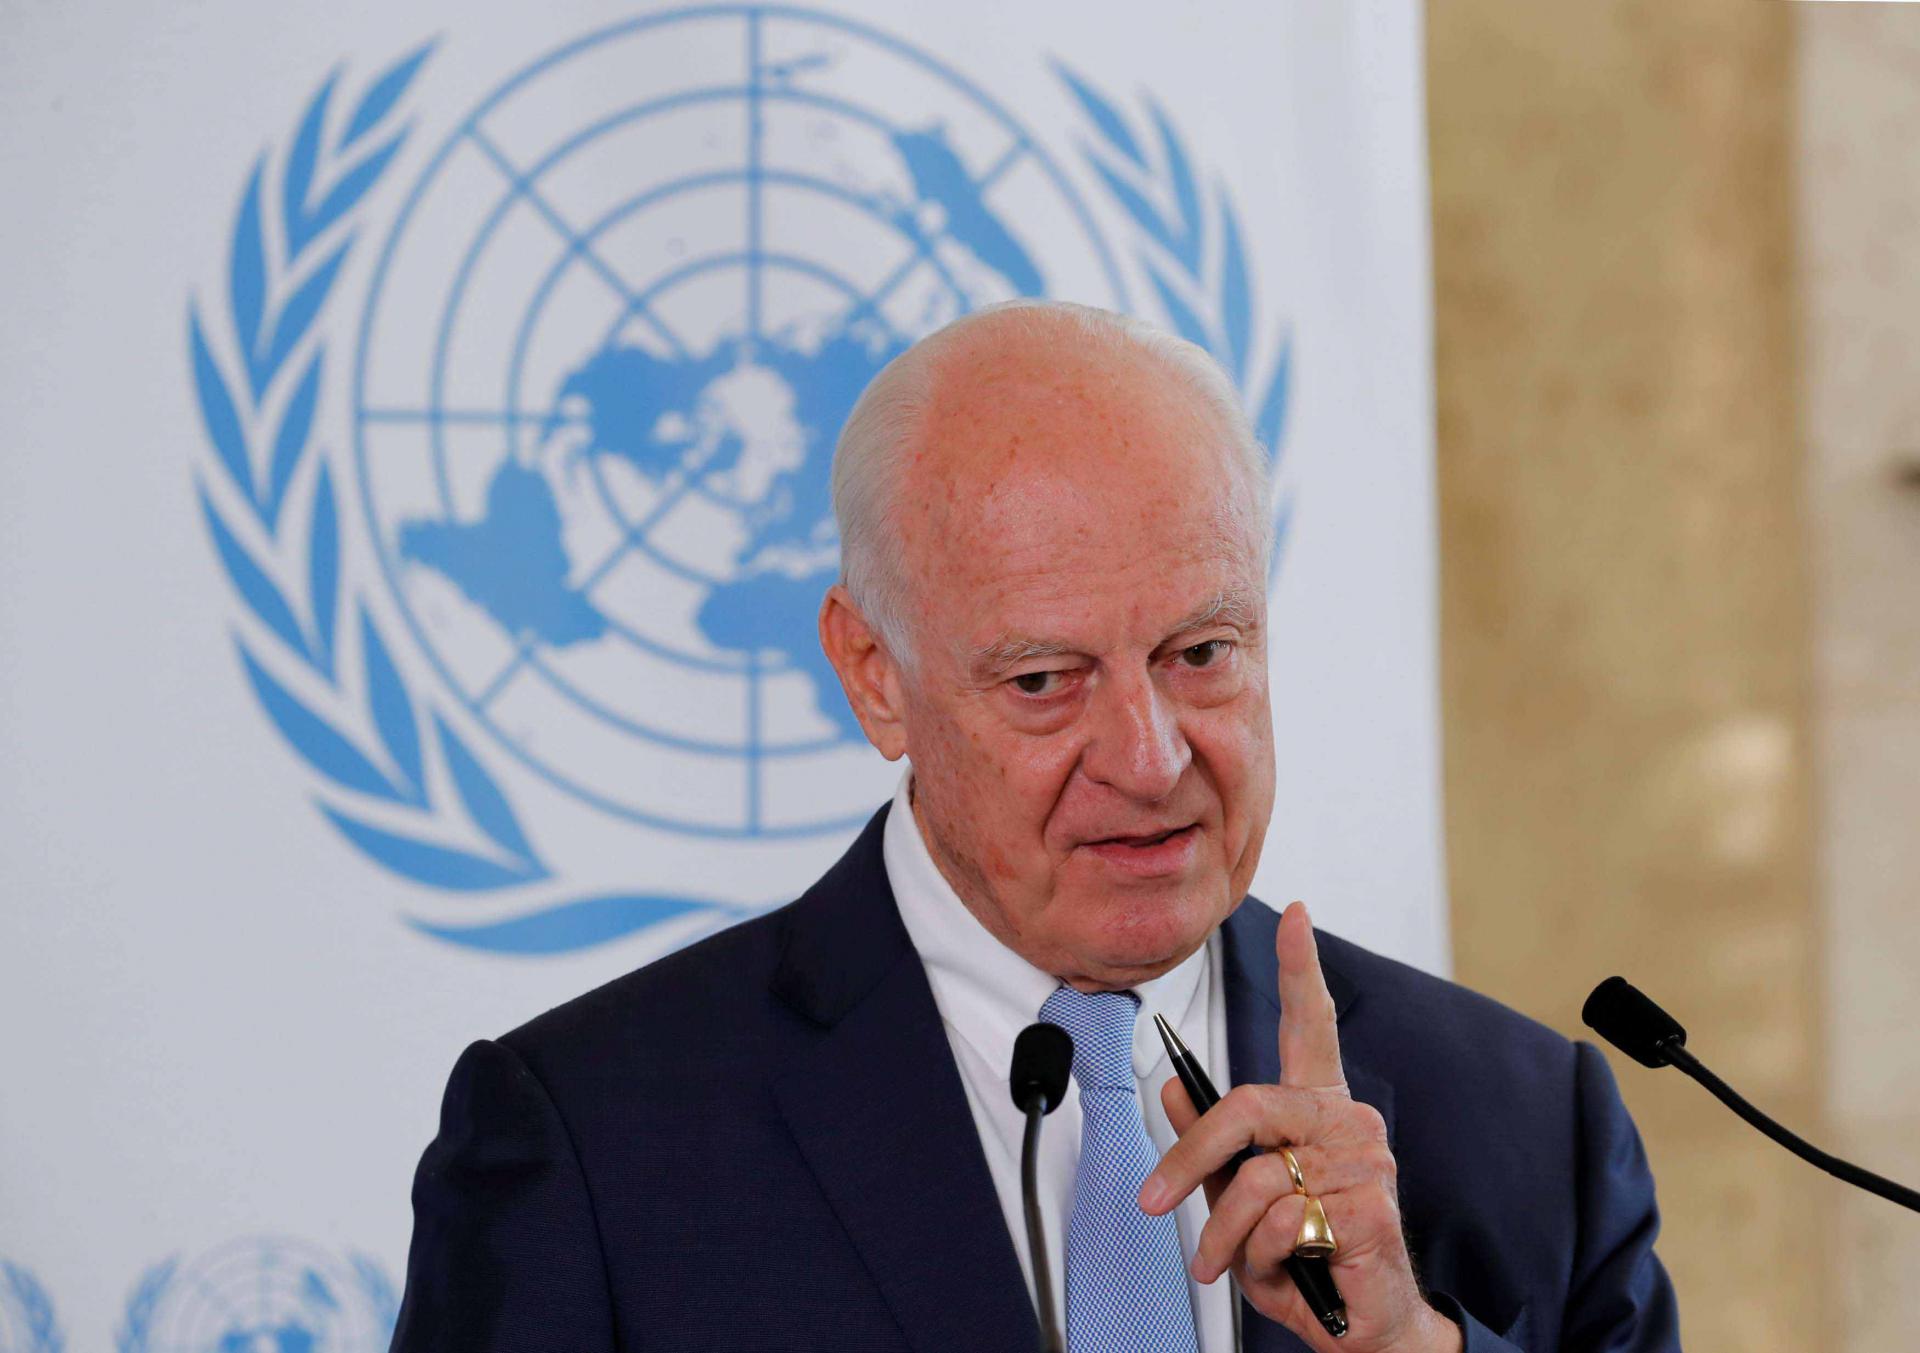 The United Nations will be represented at the negotiations by Syria envoy Staffan de Mistura